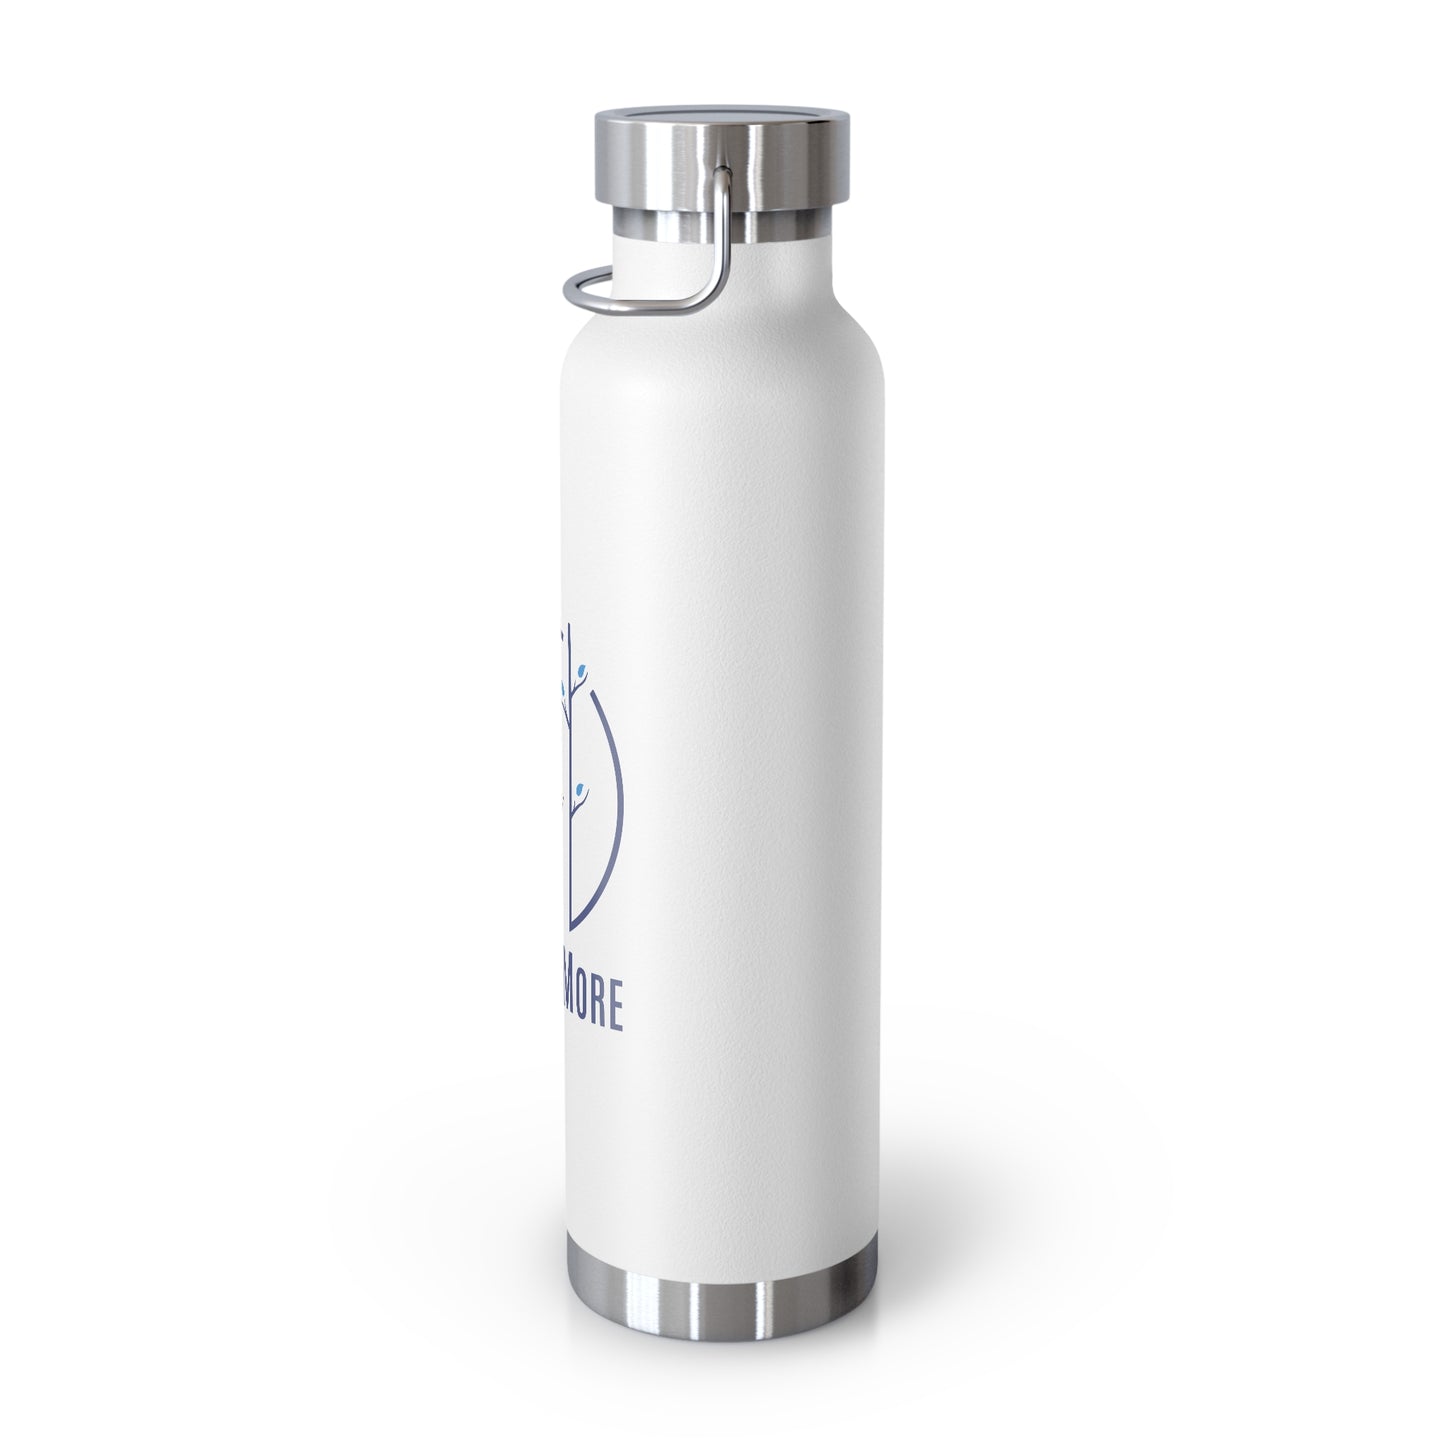 BecomeMore Vacuum Insulated Bottle, 22oz